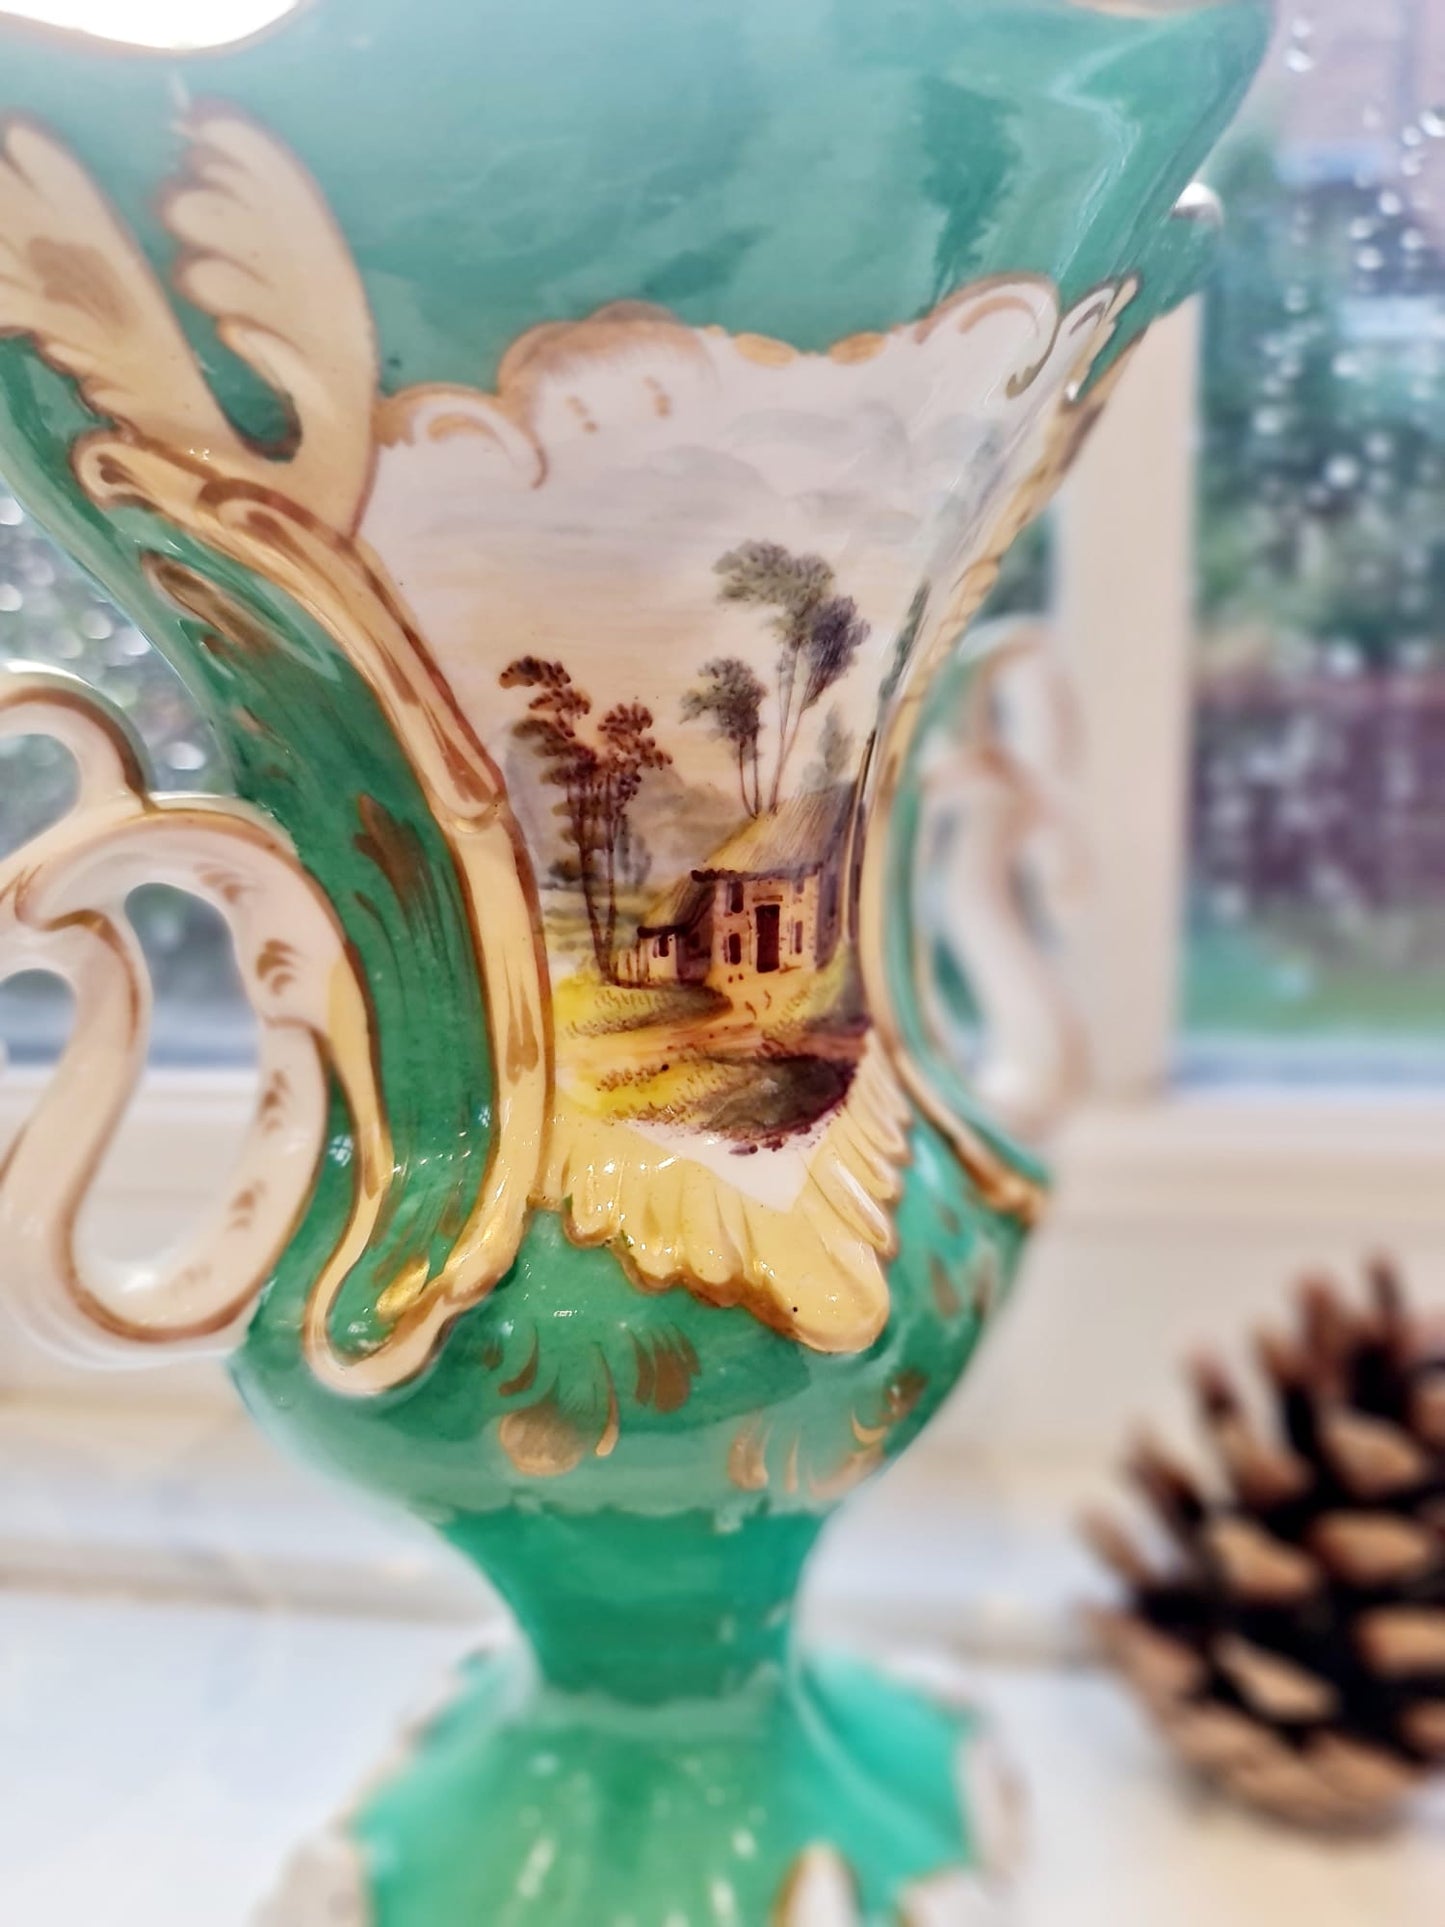 Antique beautiful vase made by Samuel Alcock around the year 1840